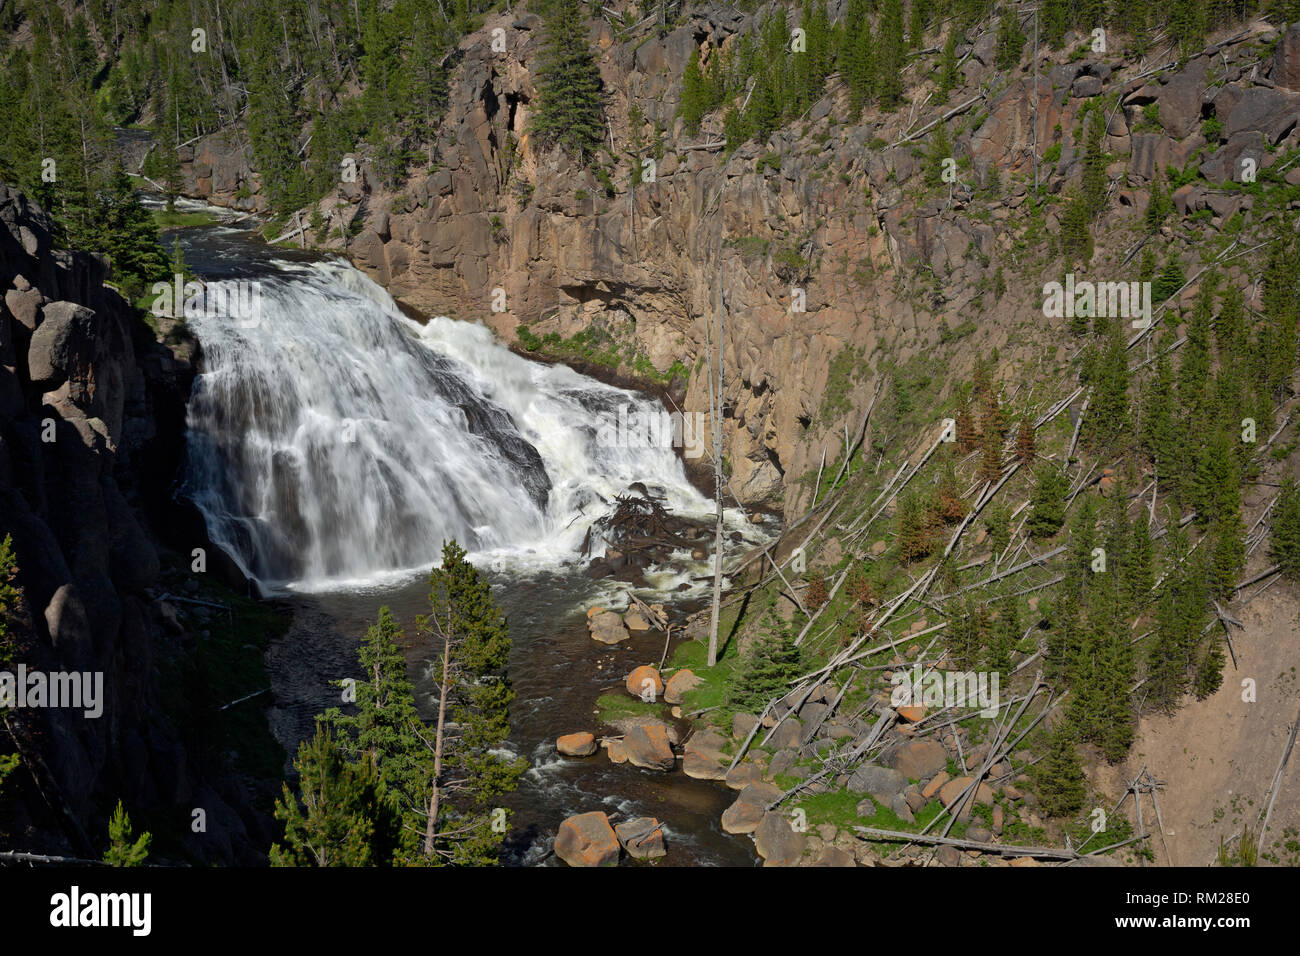 WY03465-00...WYOMING - Gibbon Falls in the Gibbon River Gorge of Yellowstone National Park. Stock Photo